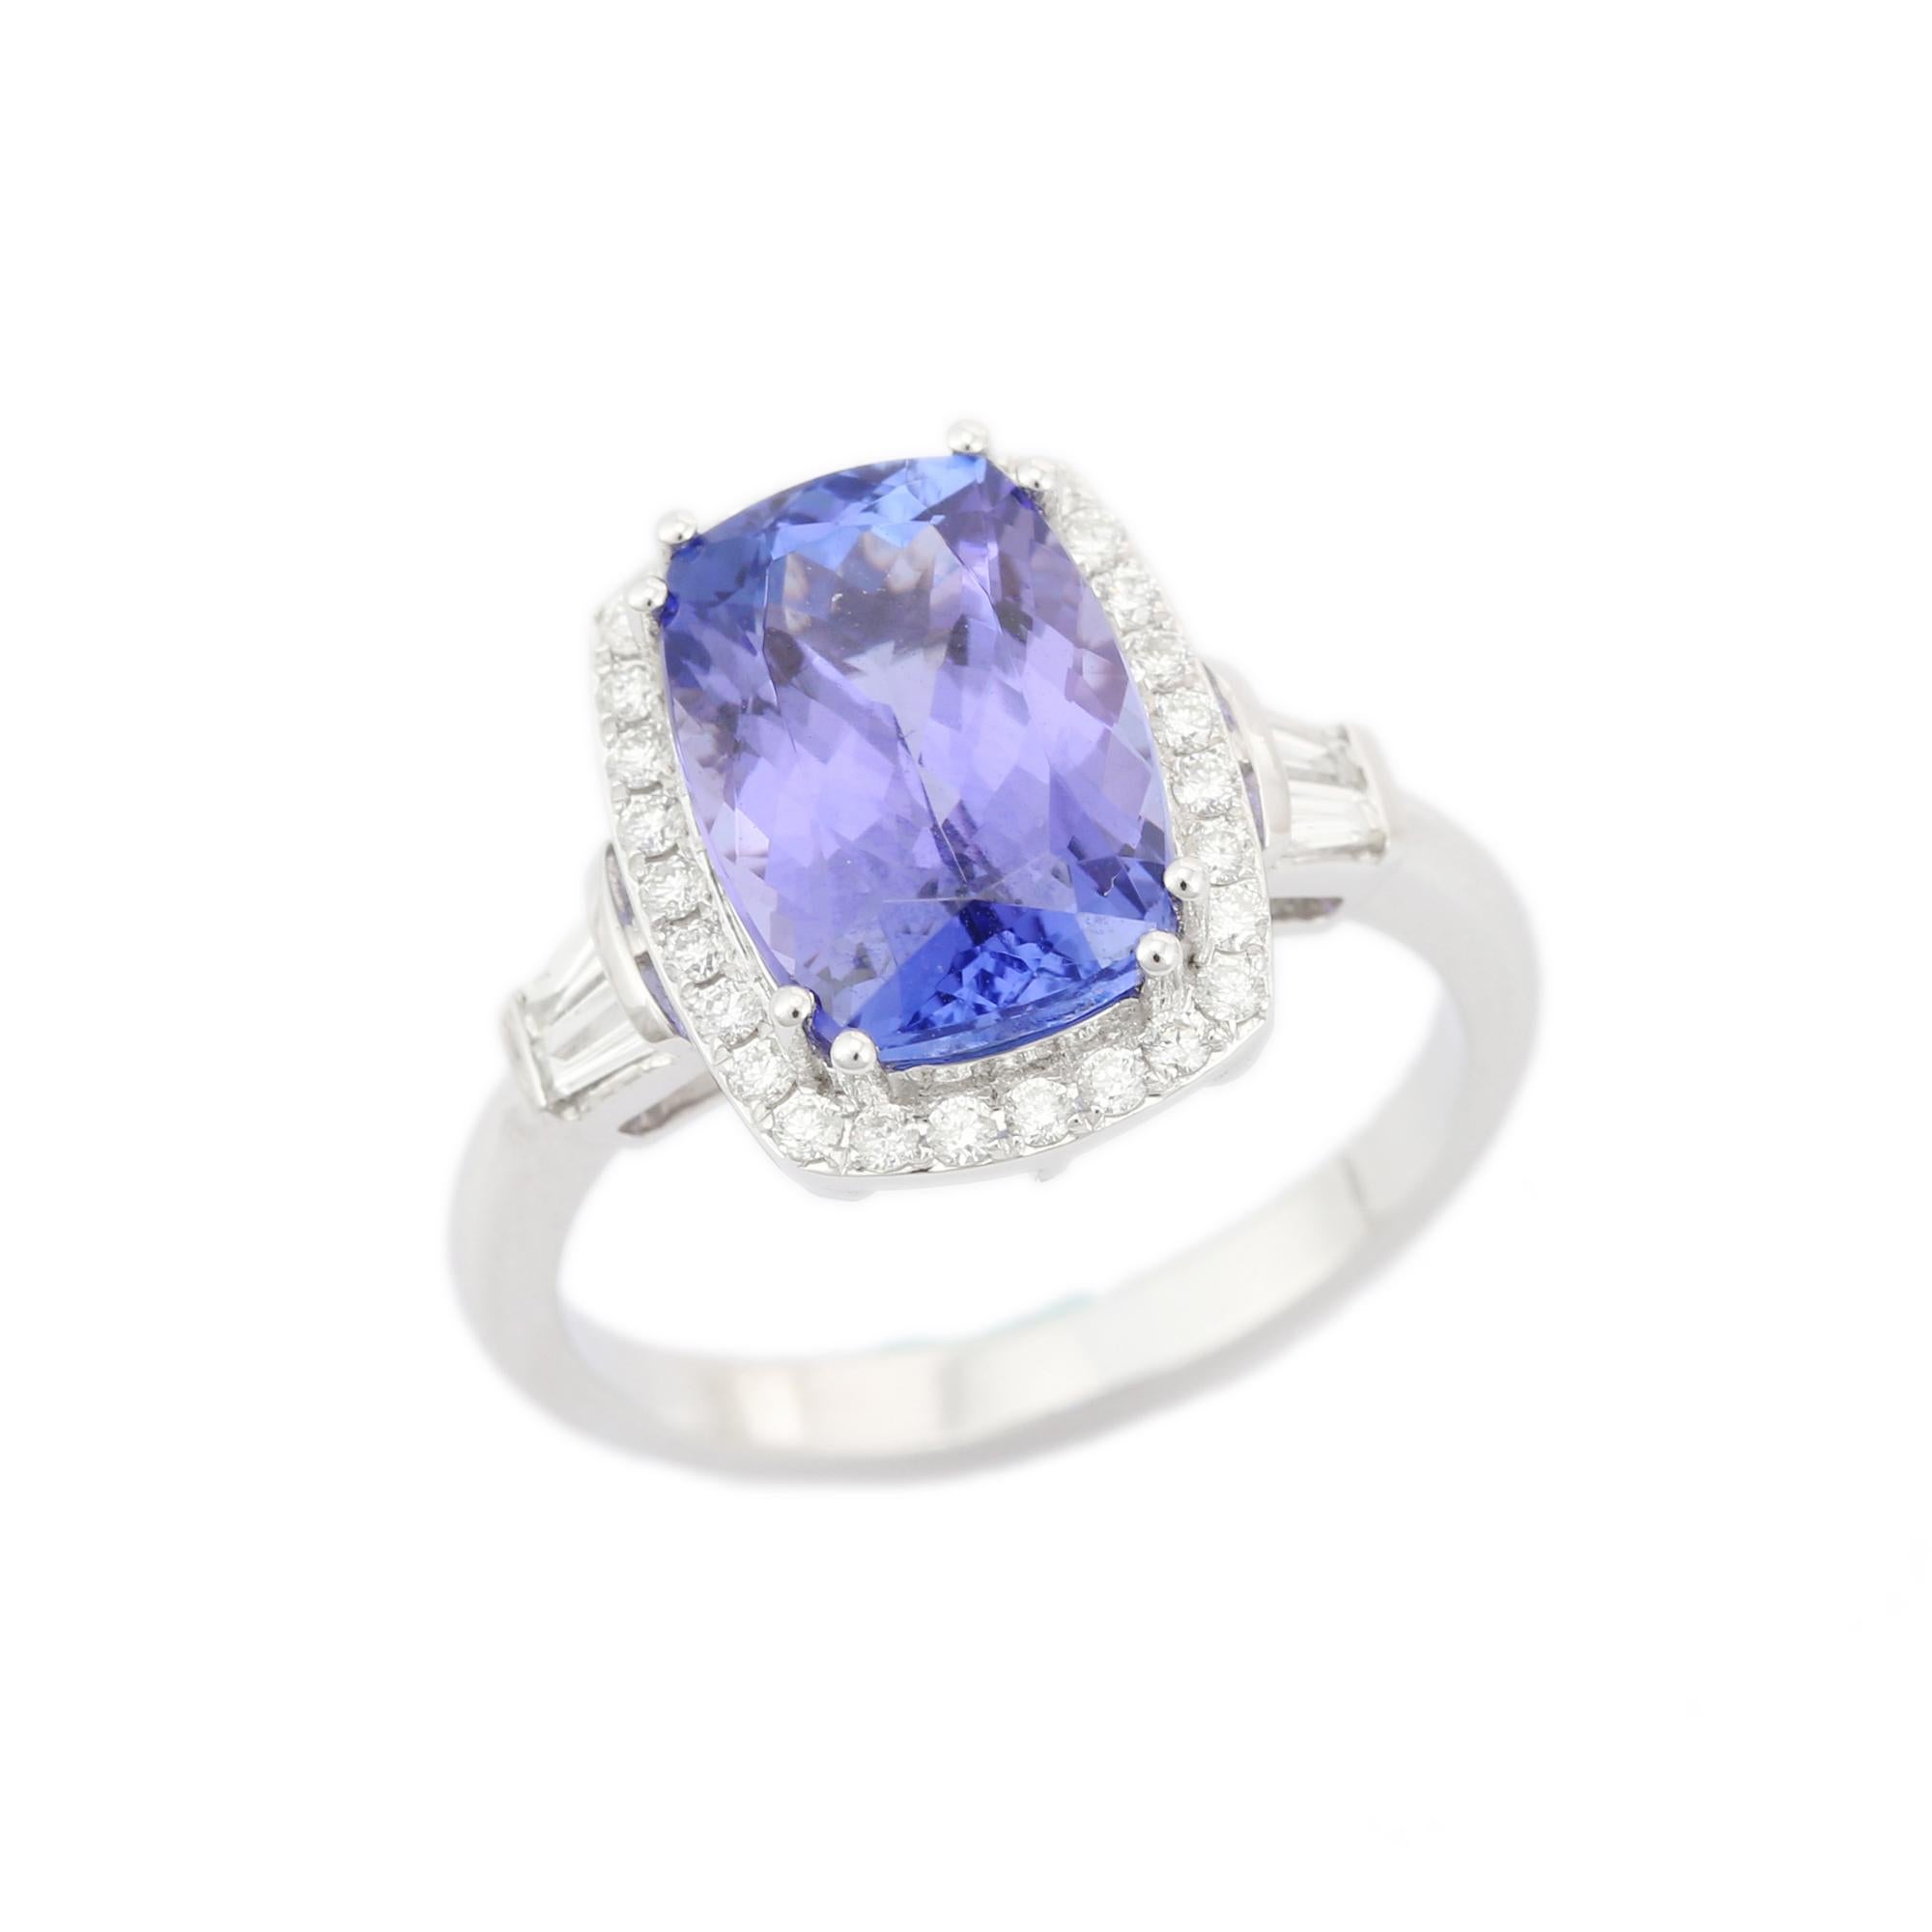 For Sale:  Tanzanite with Diamonds in 18K White Gold Cocktail Ring 5